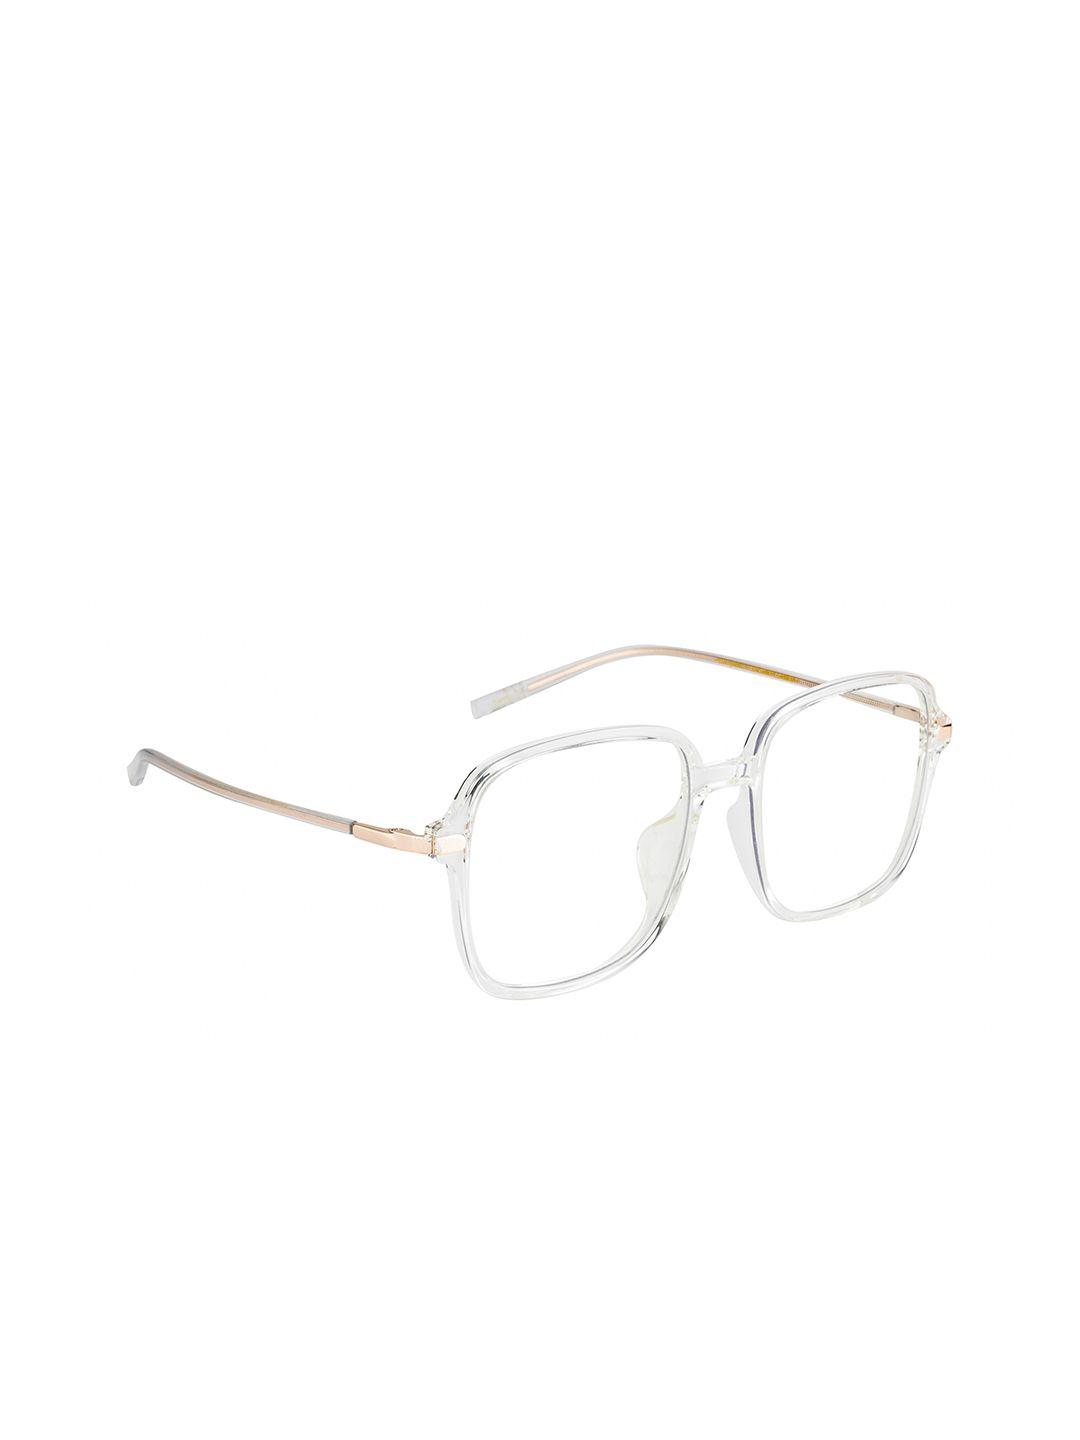 ted smith unisex transparent full rim square frames ts-363_g.cry